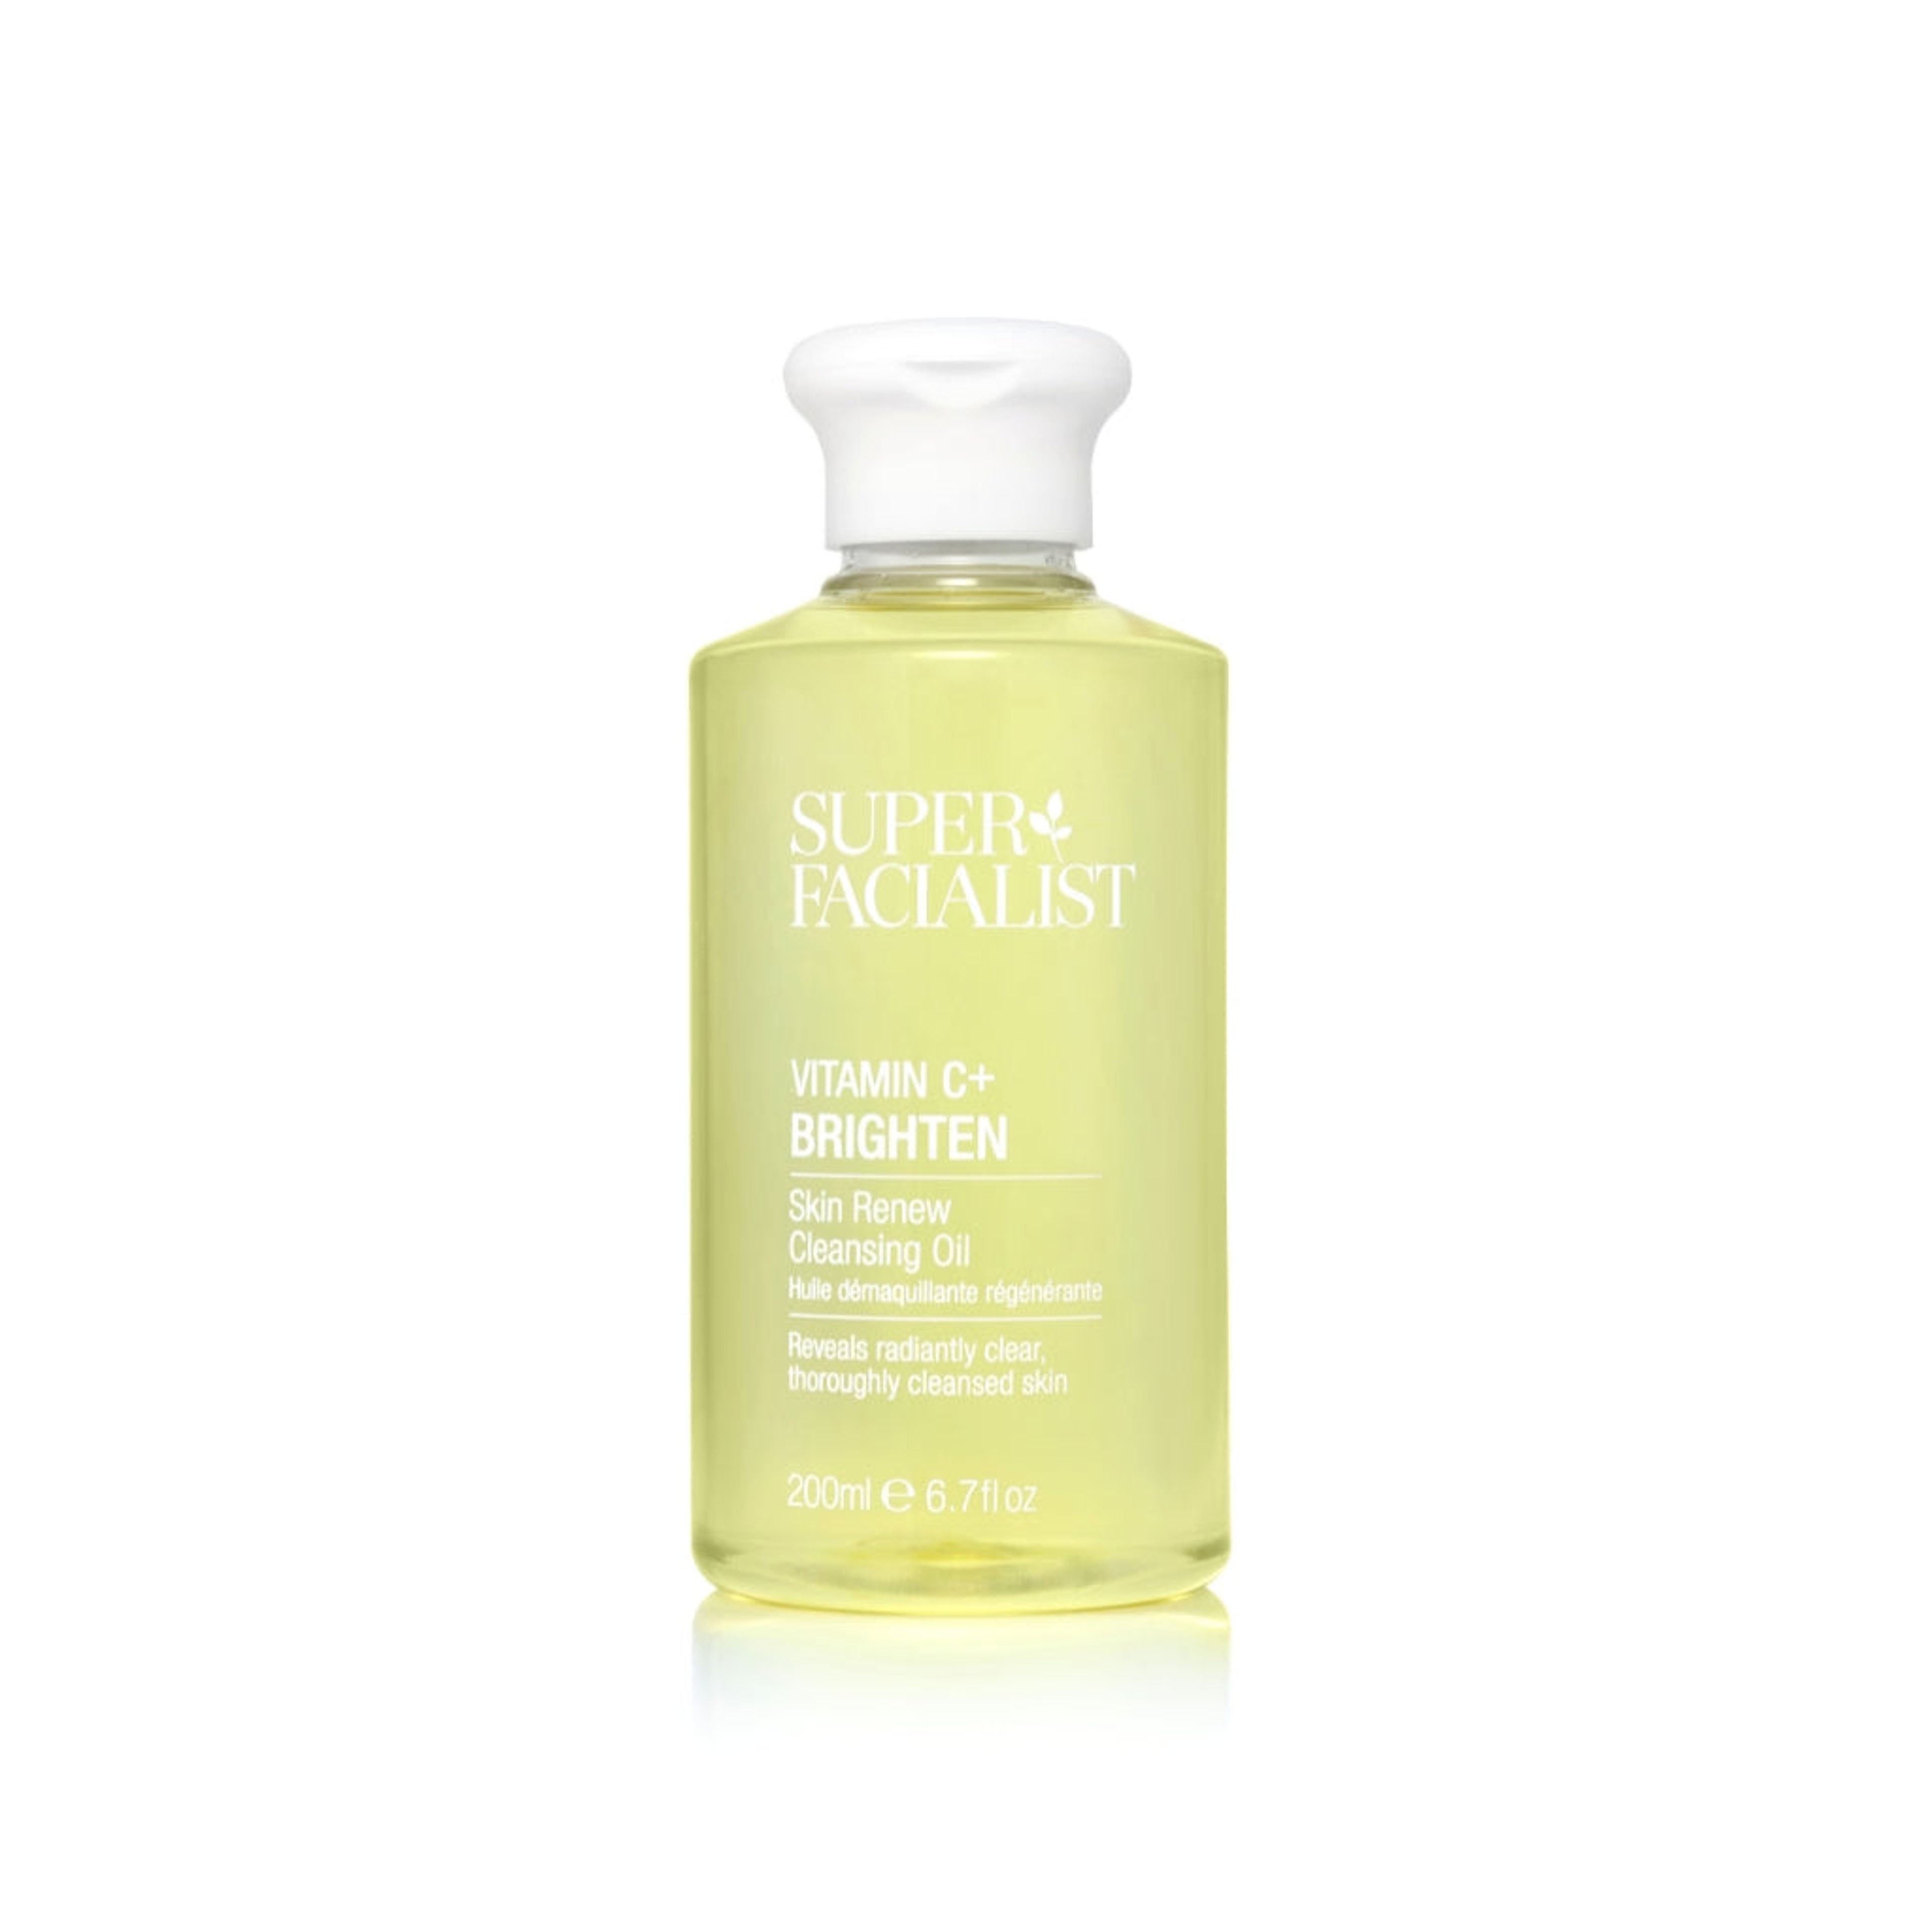 Vitamin C+ Brighten Cleansing Oil image 1 expanded